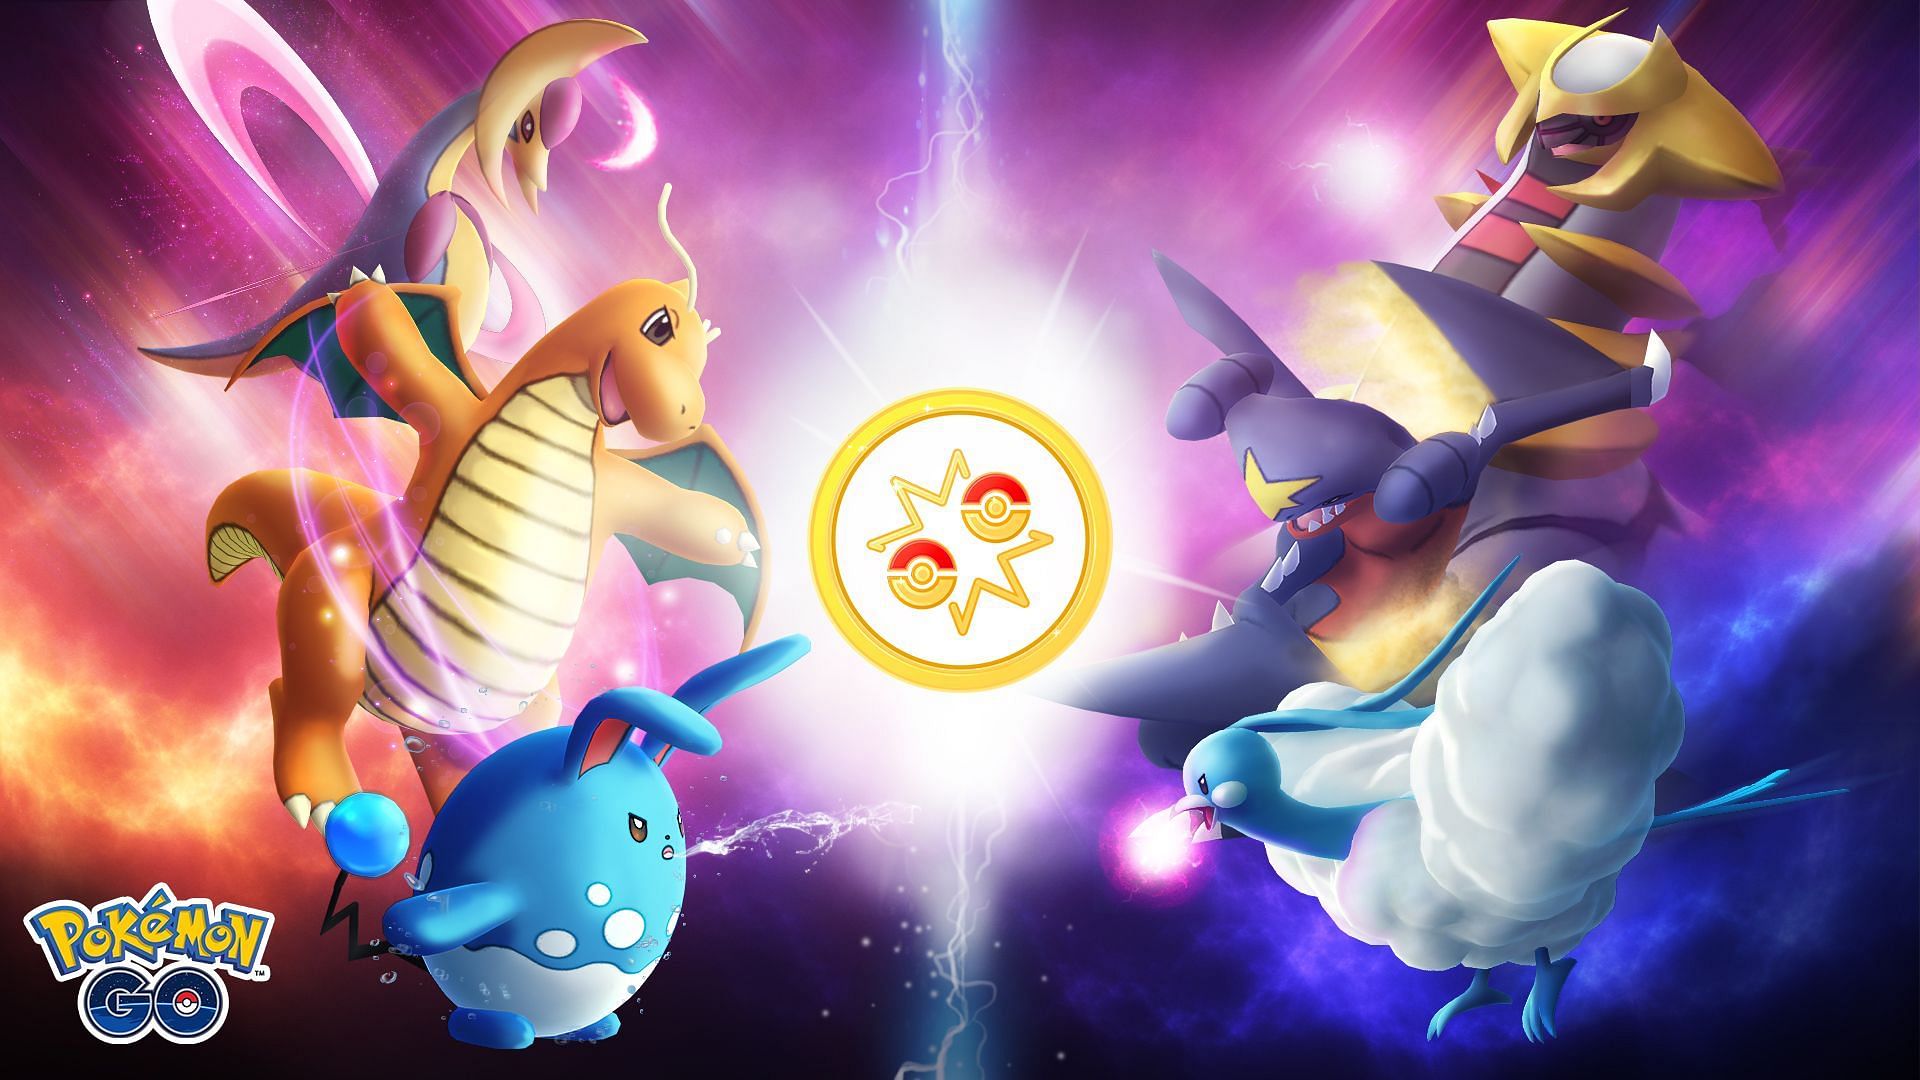 What Are The Strongest Moves In Pokemon GO?